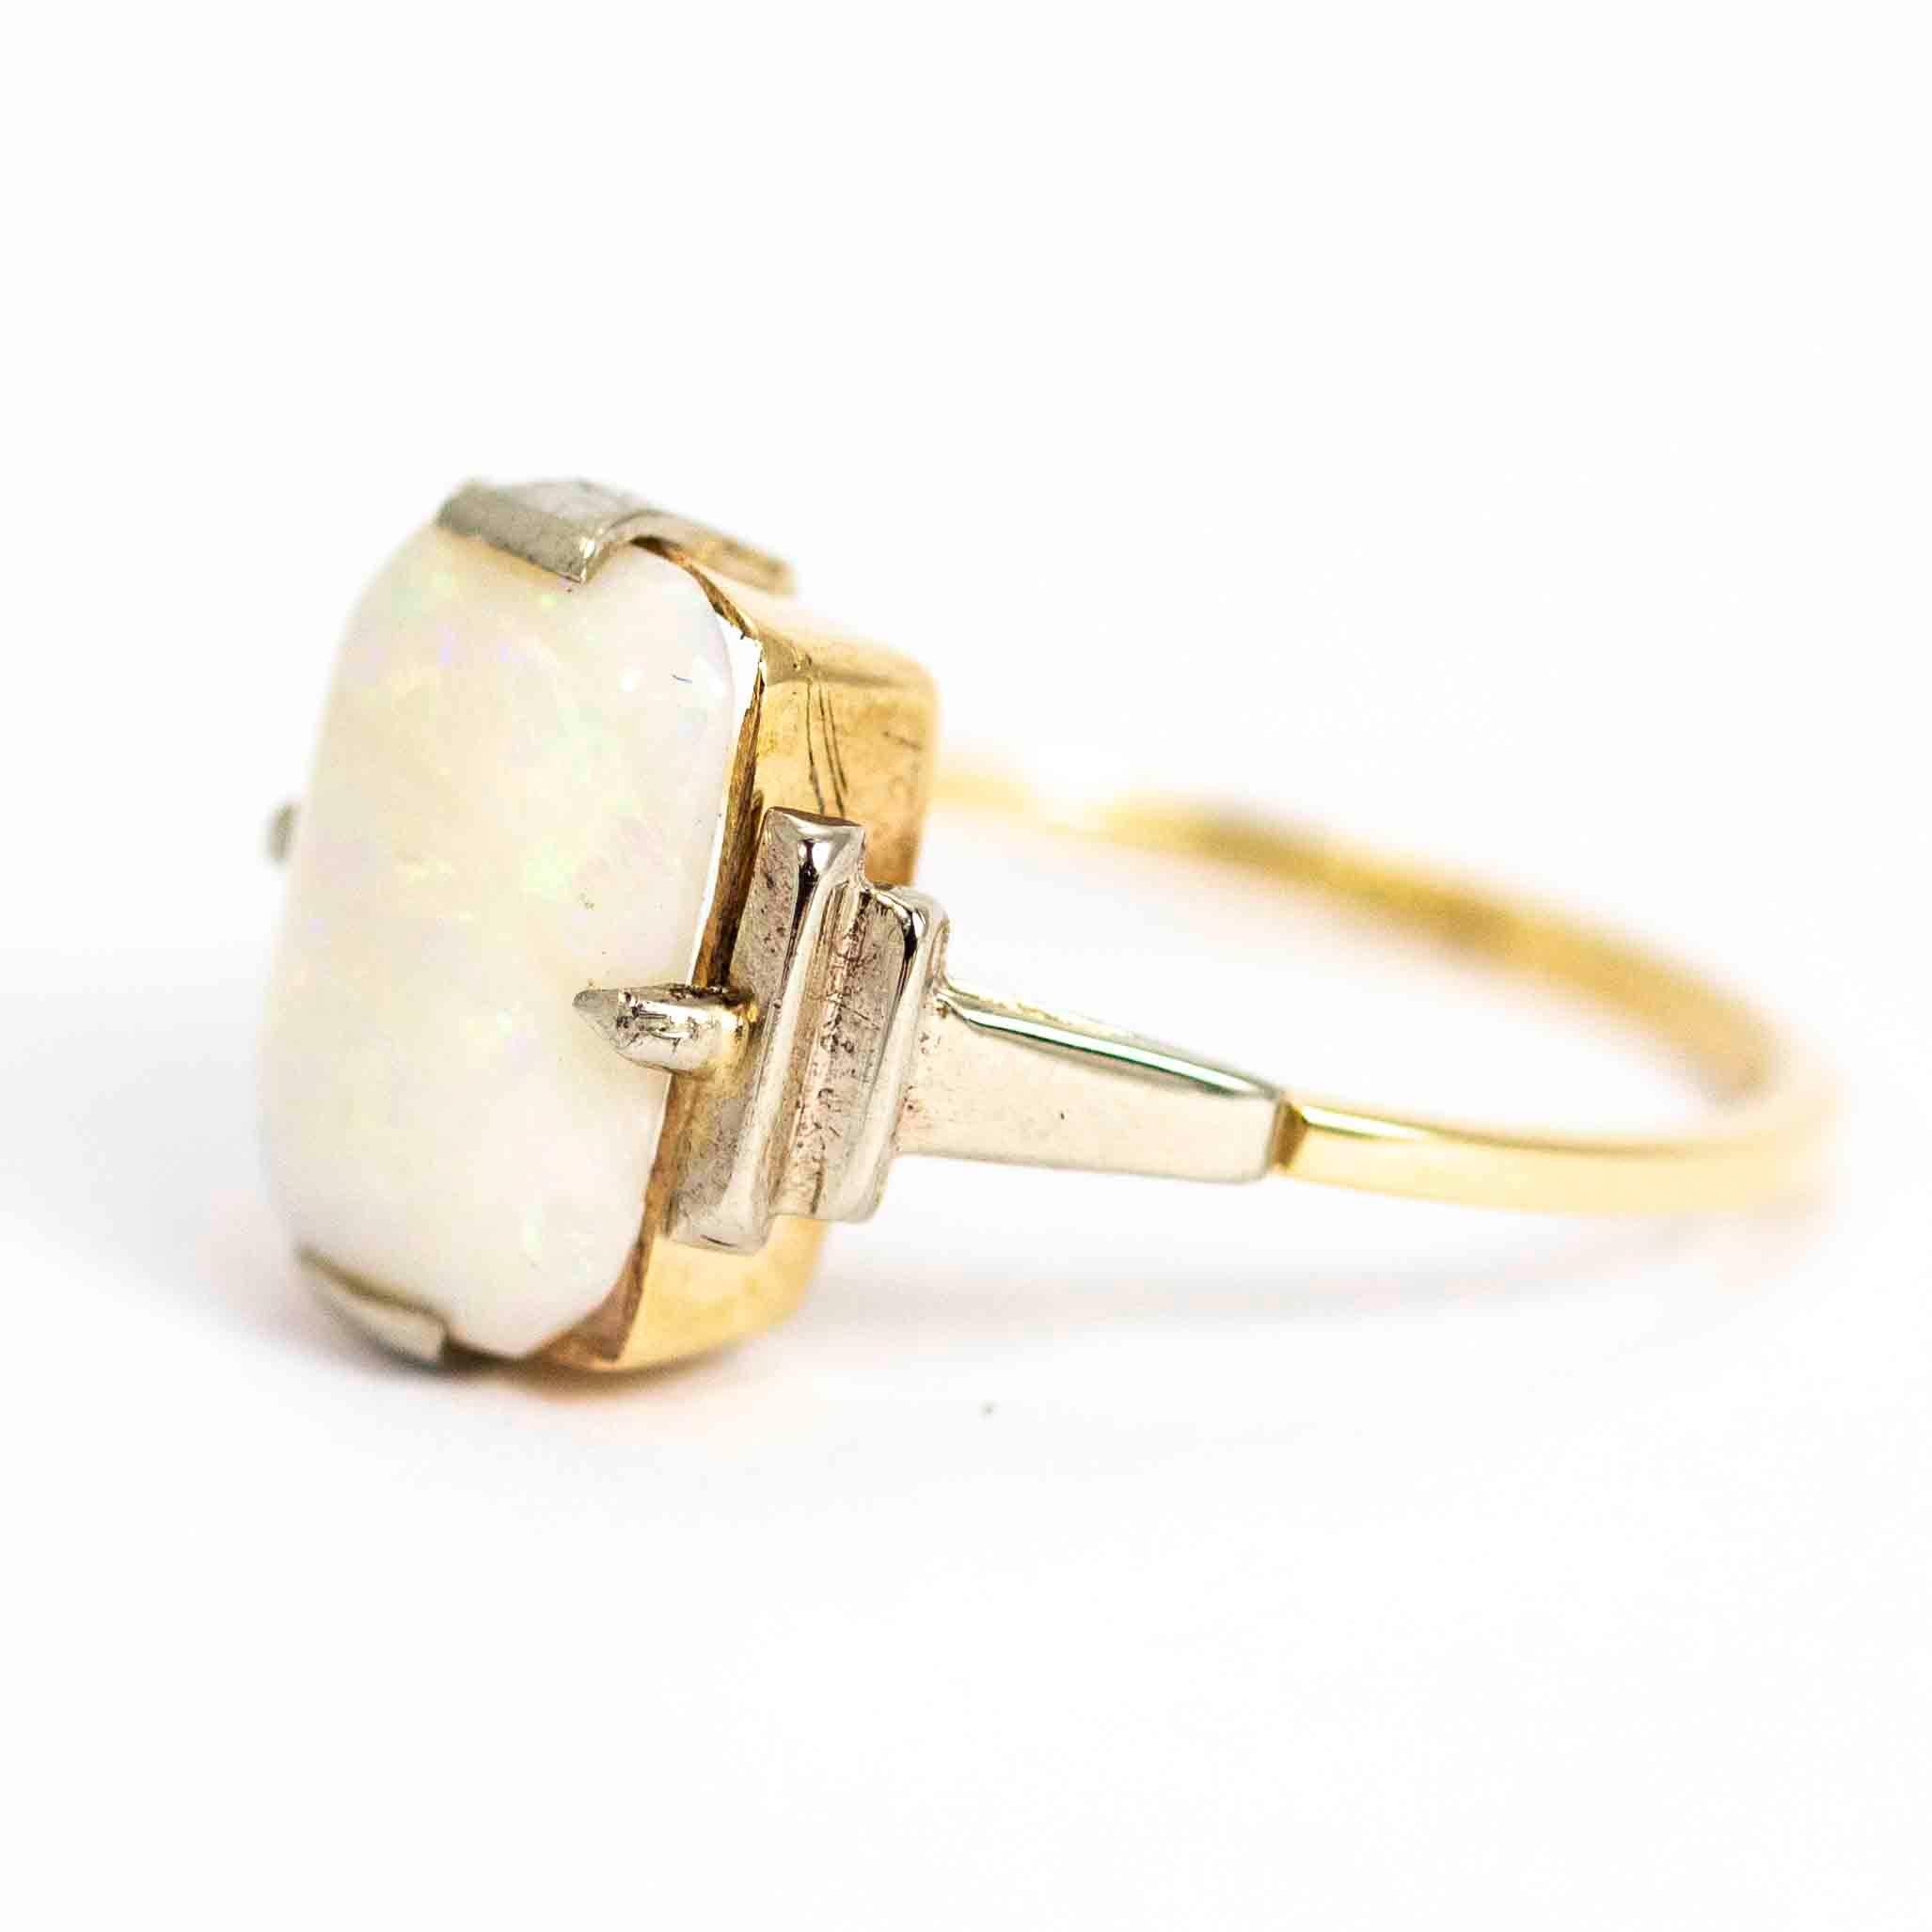 A beautiful vintage Art Deco ring. Set with a large rectangular opal between classic stepped shoulders, typical of the Art Deco period. The stone settings and shoulders are modelled in white gold, the band of the ring is modelled in 9 carat yellow